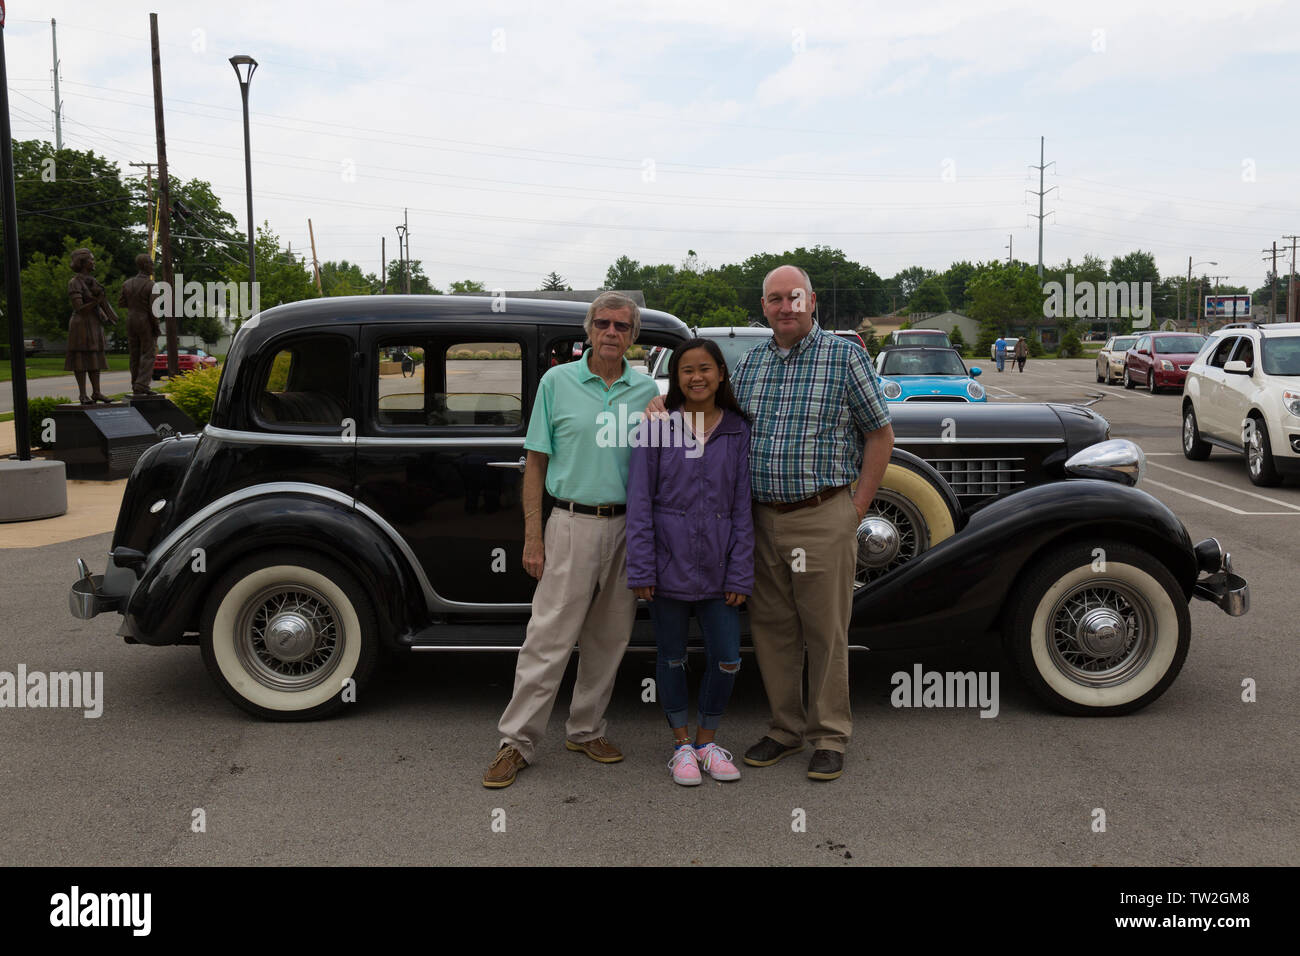 A family poses near the black 1935 Auburn 851 sedan they rode in during the Auburn Cord Duesenberg Museum's Father's Day Classic Car Cruise in Indiana. Stock Photo